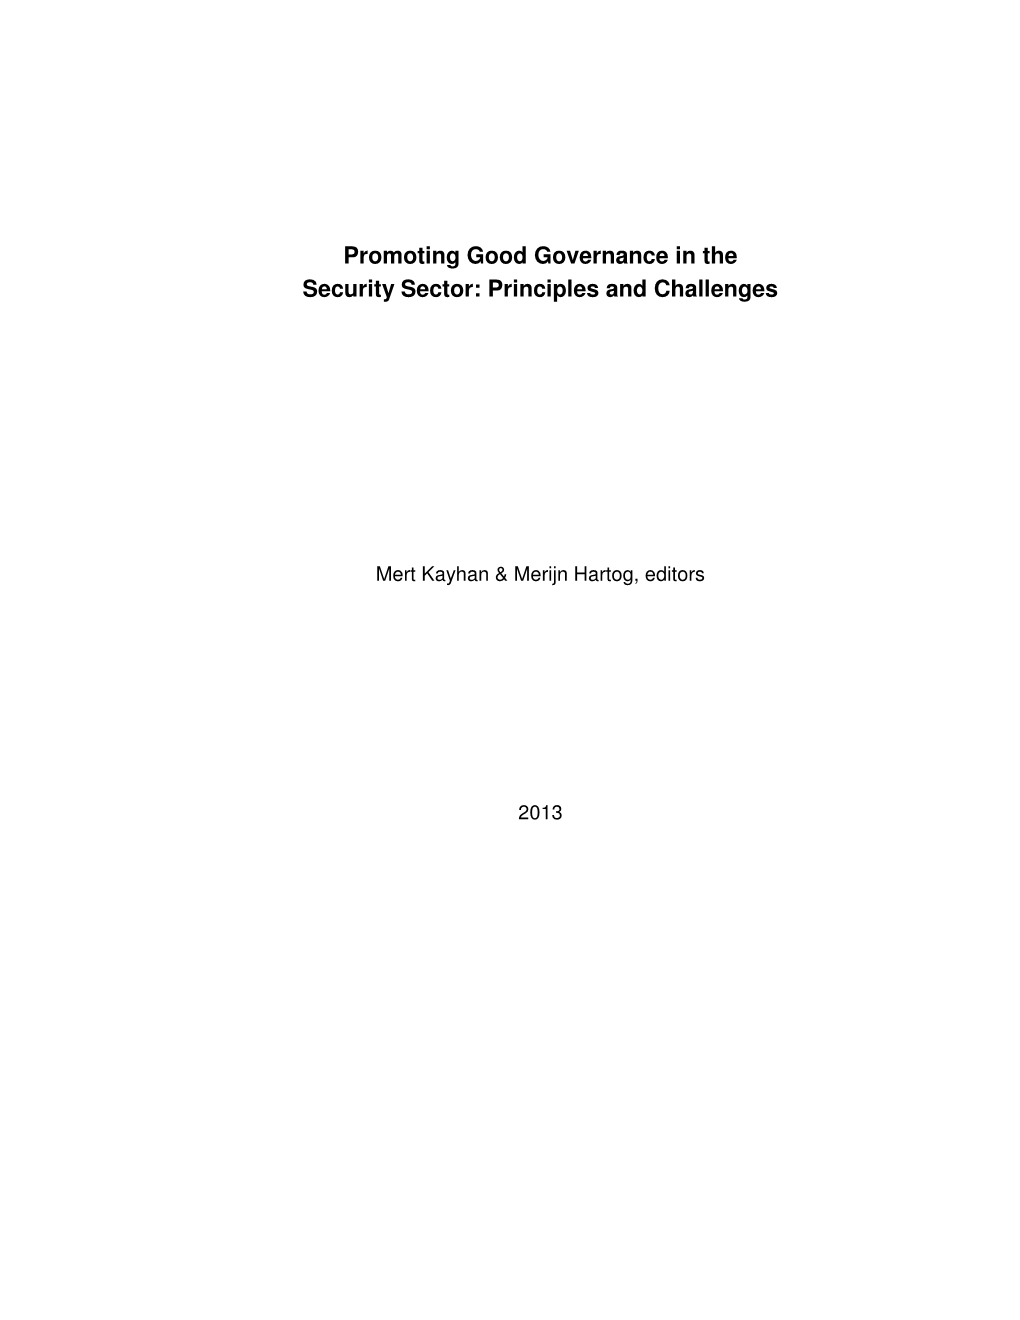 Promoting Good Governance in the Security Sector: Principles and Challenges